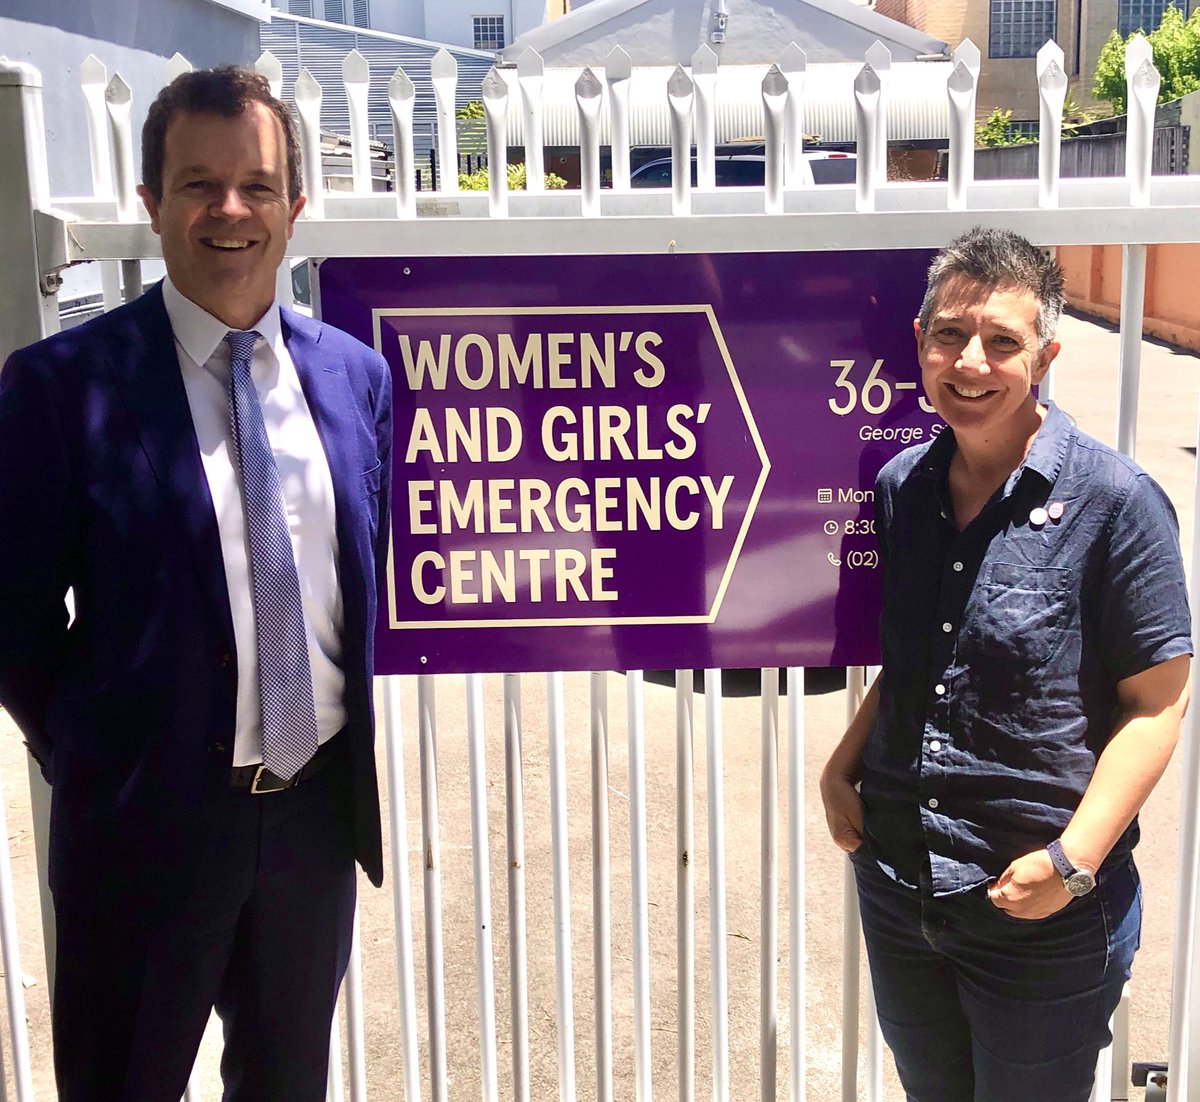 Visit to Women’s and Girls’ Emergency Centre (#WAGEC) today to discuss its #domesticviolence #primaryprevention and other programs.

#VAW #DFV